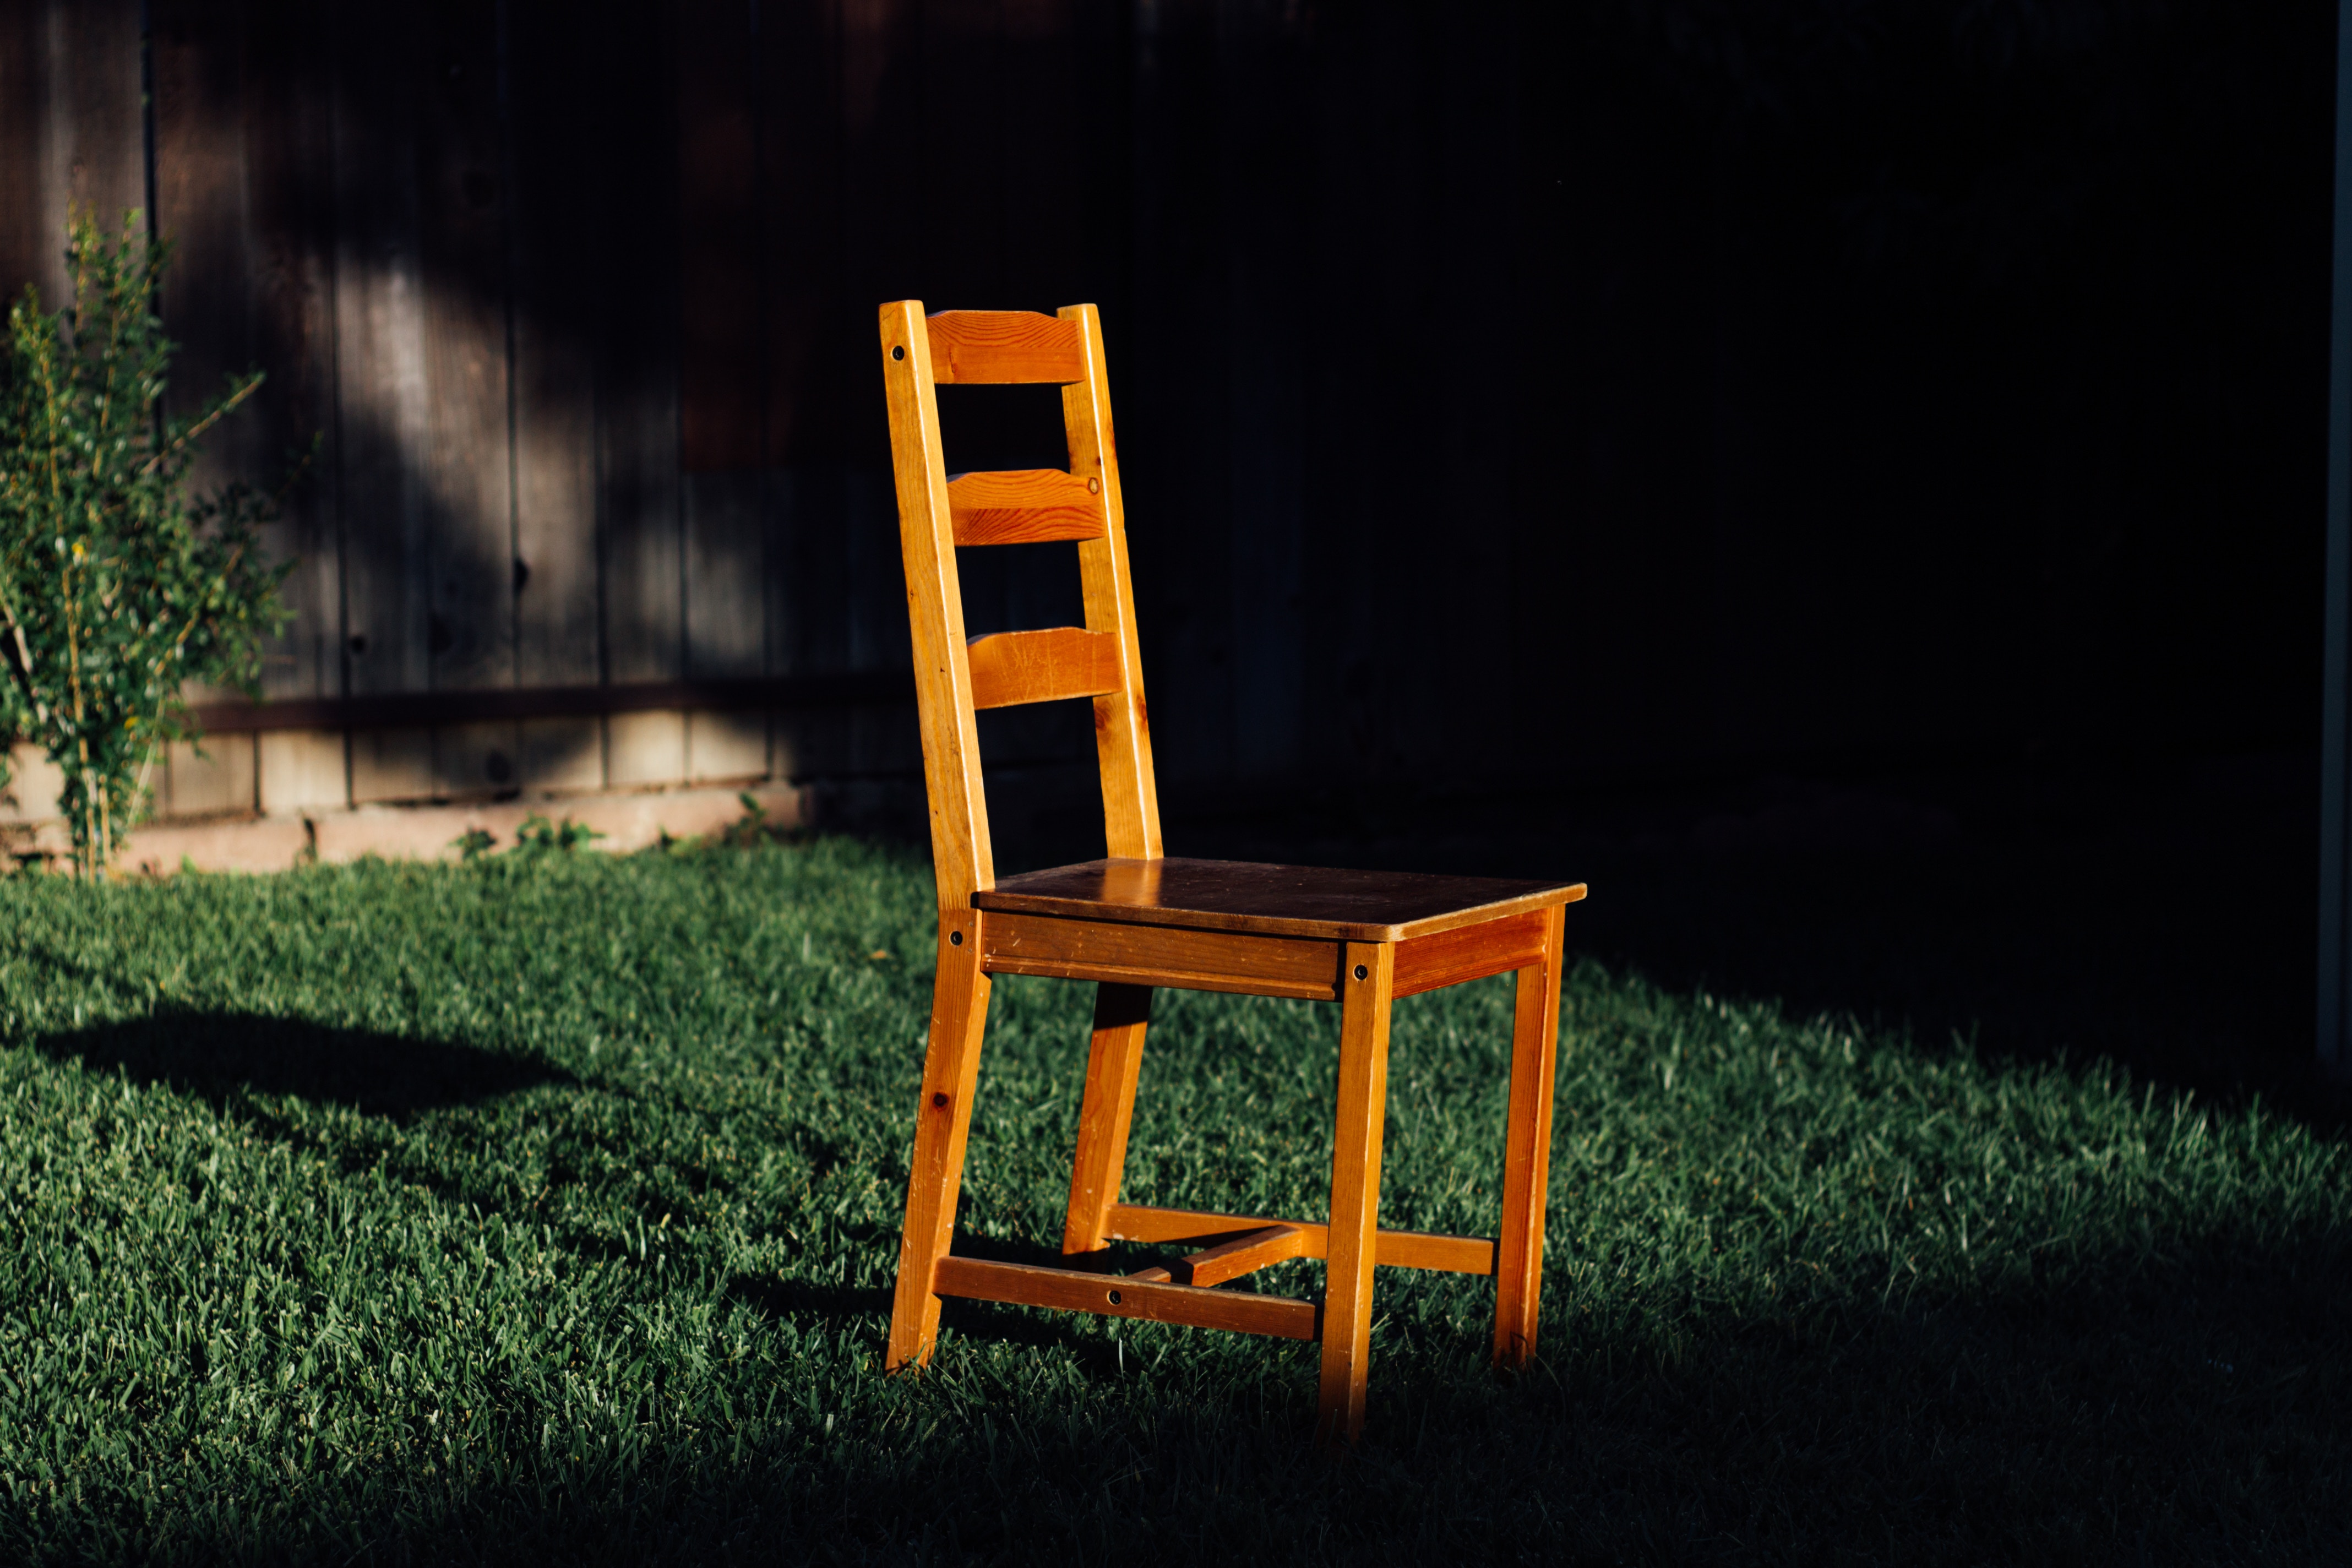 Wooden chair on a lawn